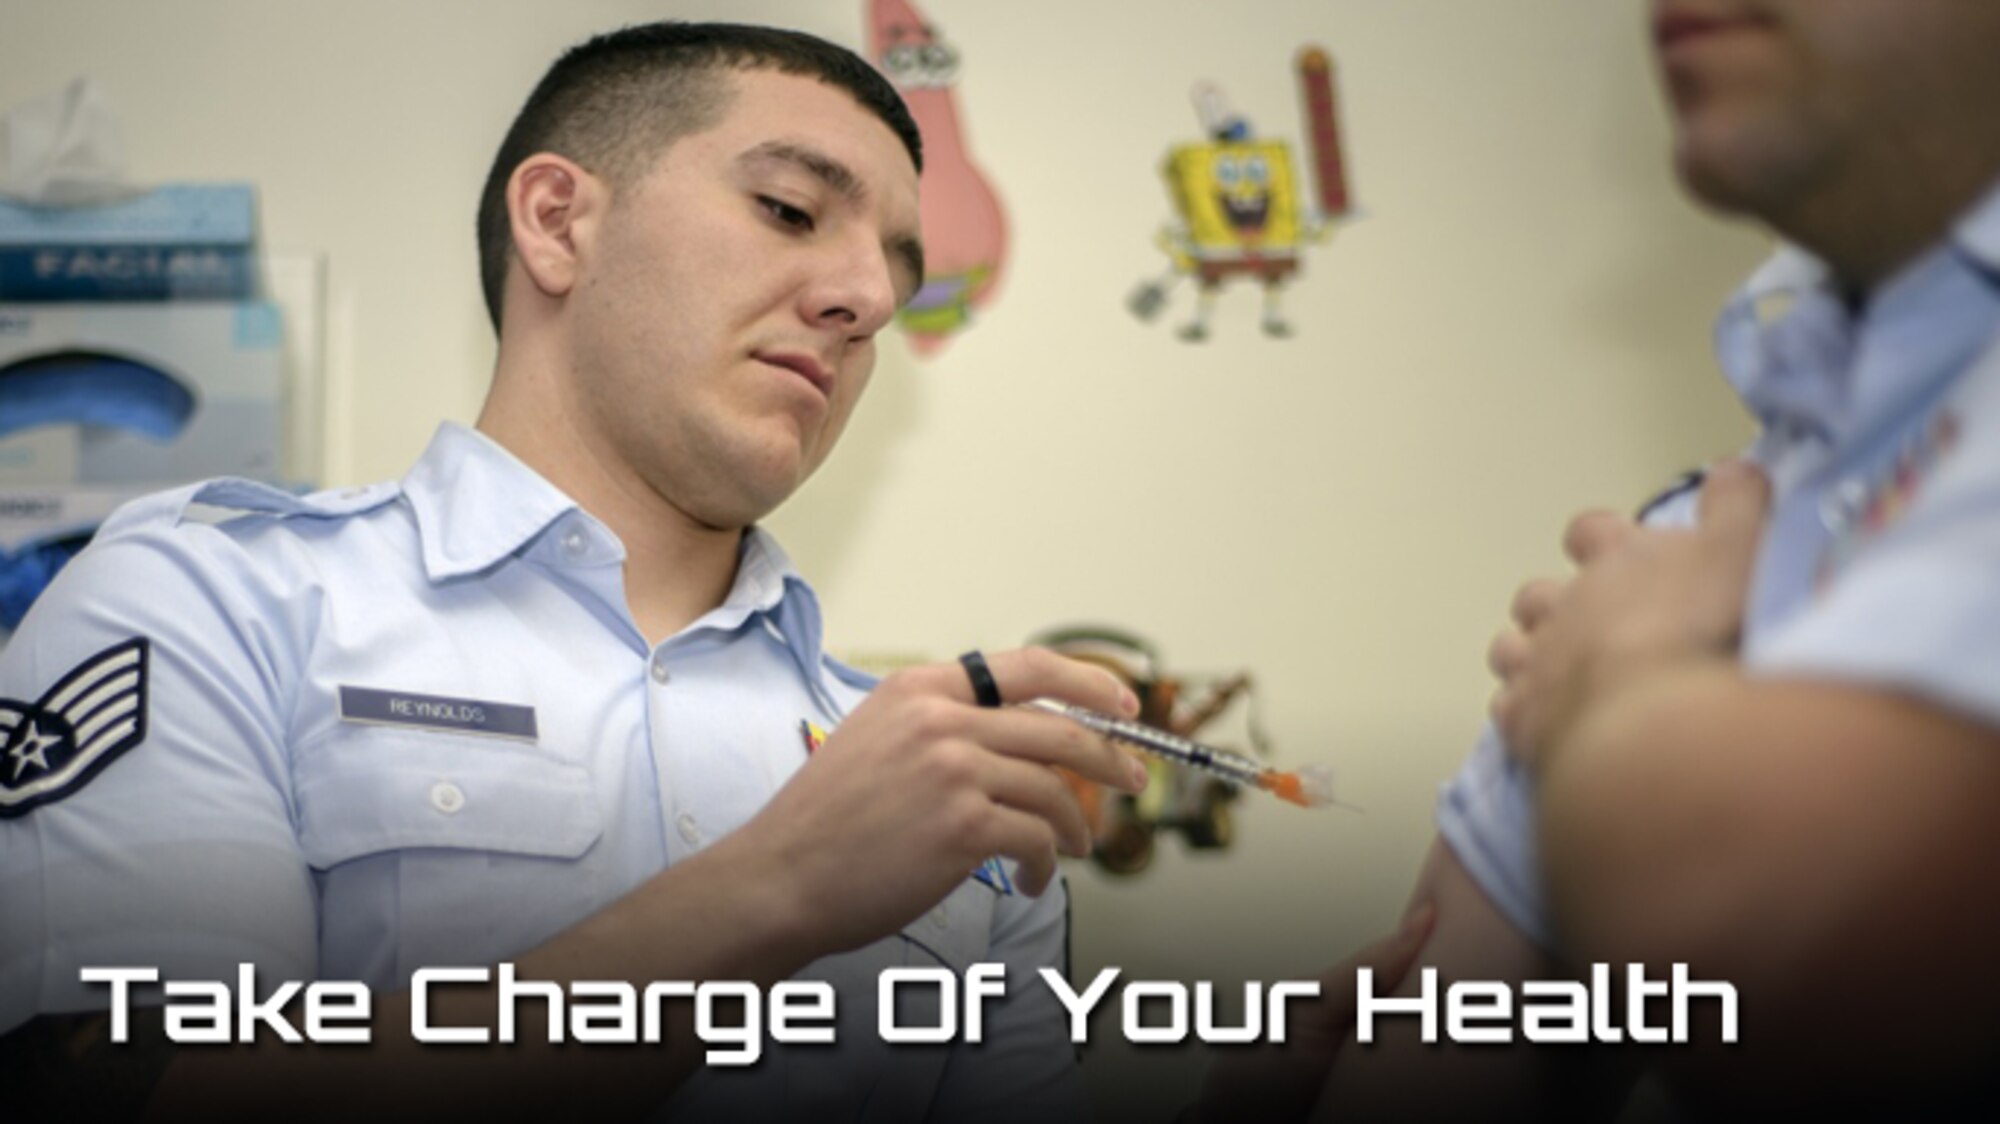 Staff Sgt. Derrick Reynolds, a 71st Medical Operations Squadron technician, vaccinates an Airman at the immunizations section of the clinic at Vance Air Force Base, Okla., Jan. 4. (Photo by David Poe, Graphic illustration by Steve Thompson) 